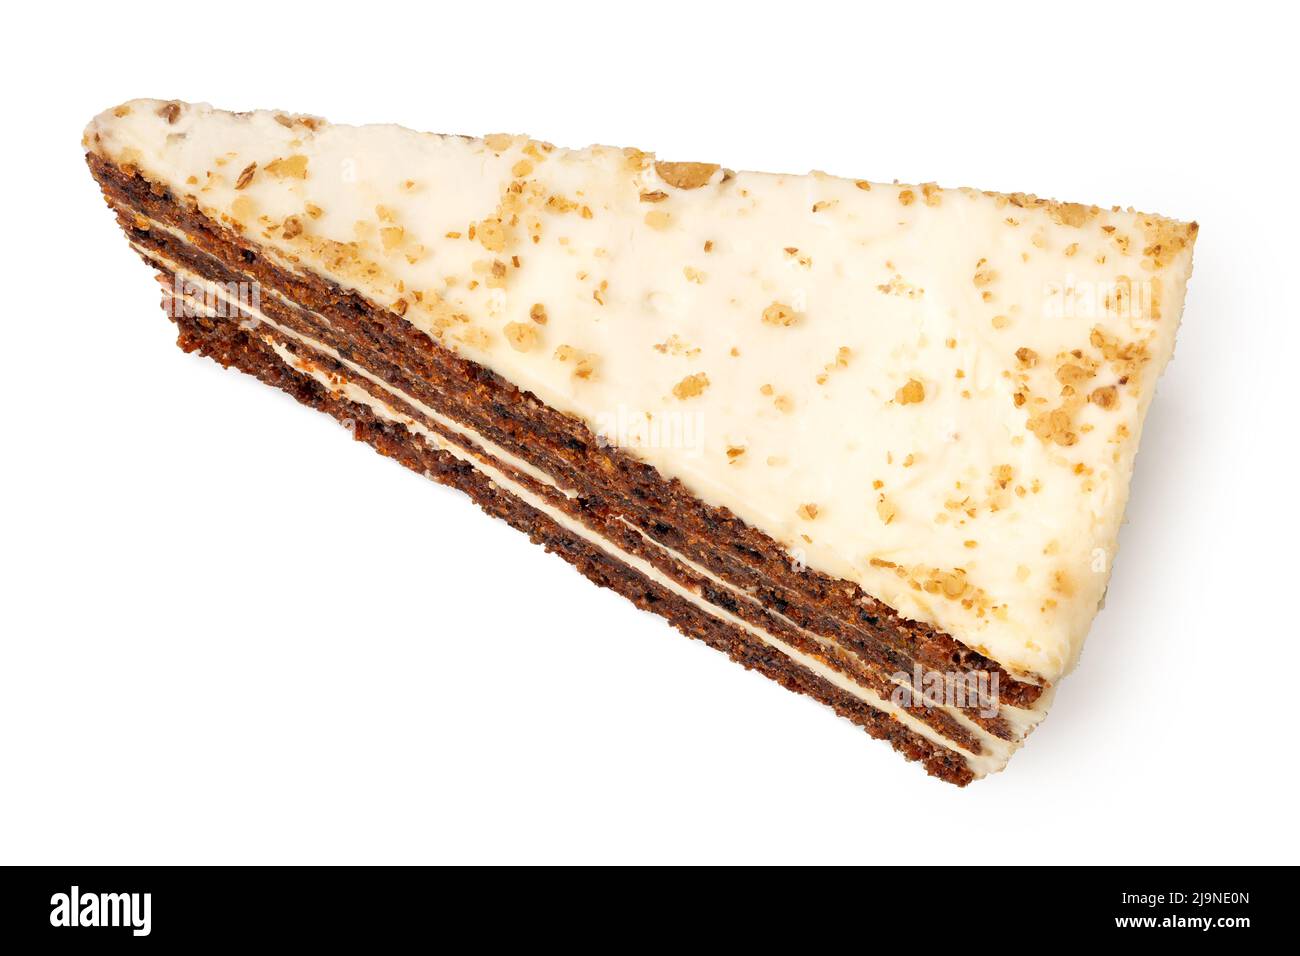 Slice of carrot cake with cream cheese filling and frosting isolated on white. Top view. Stock Photo